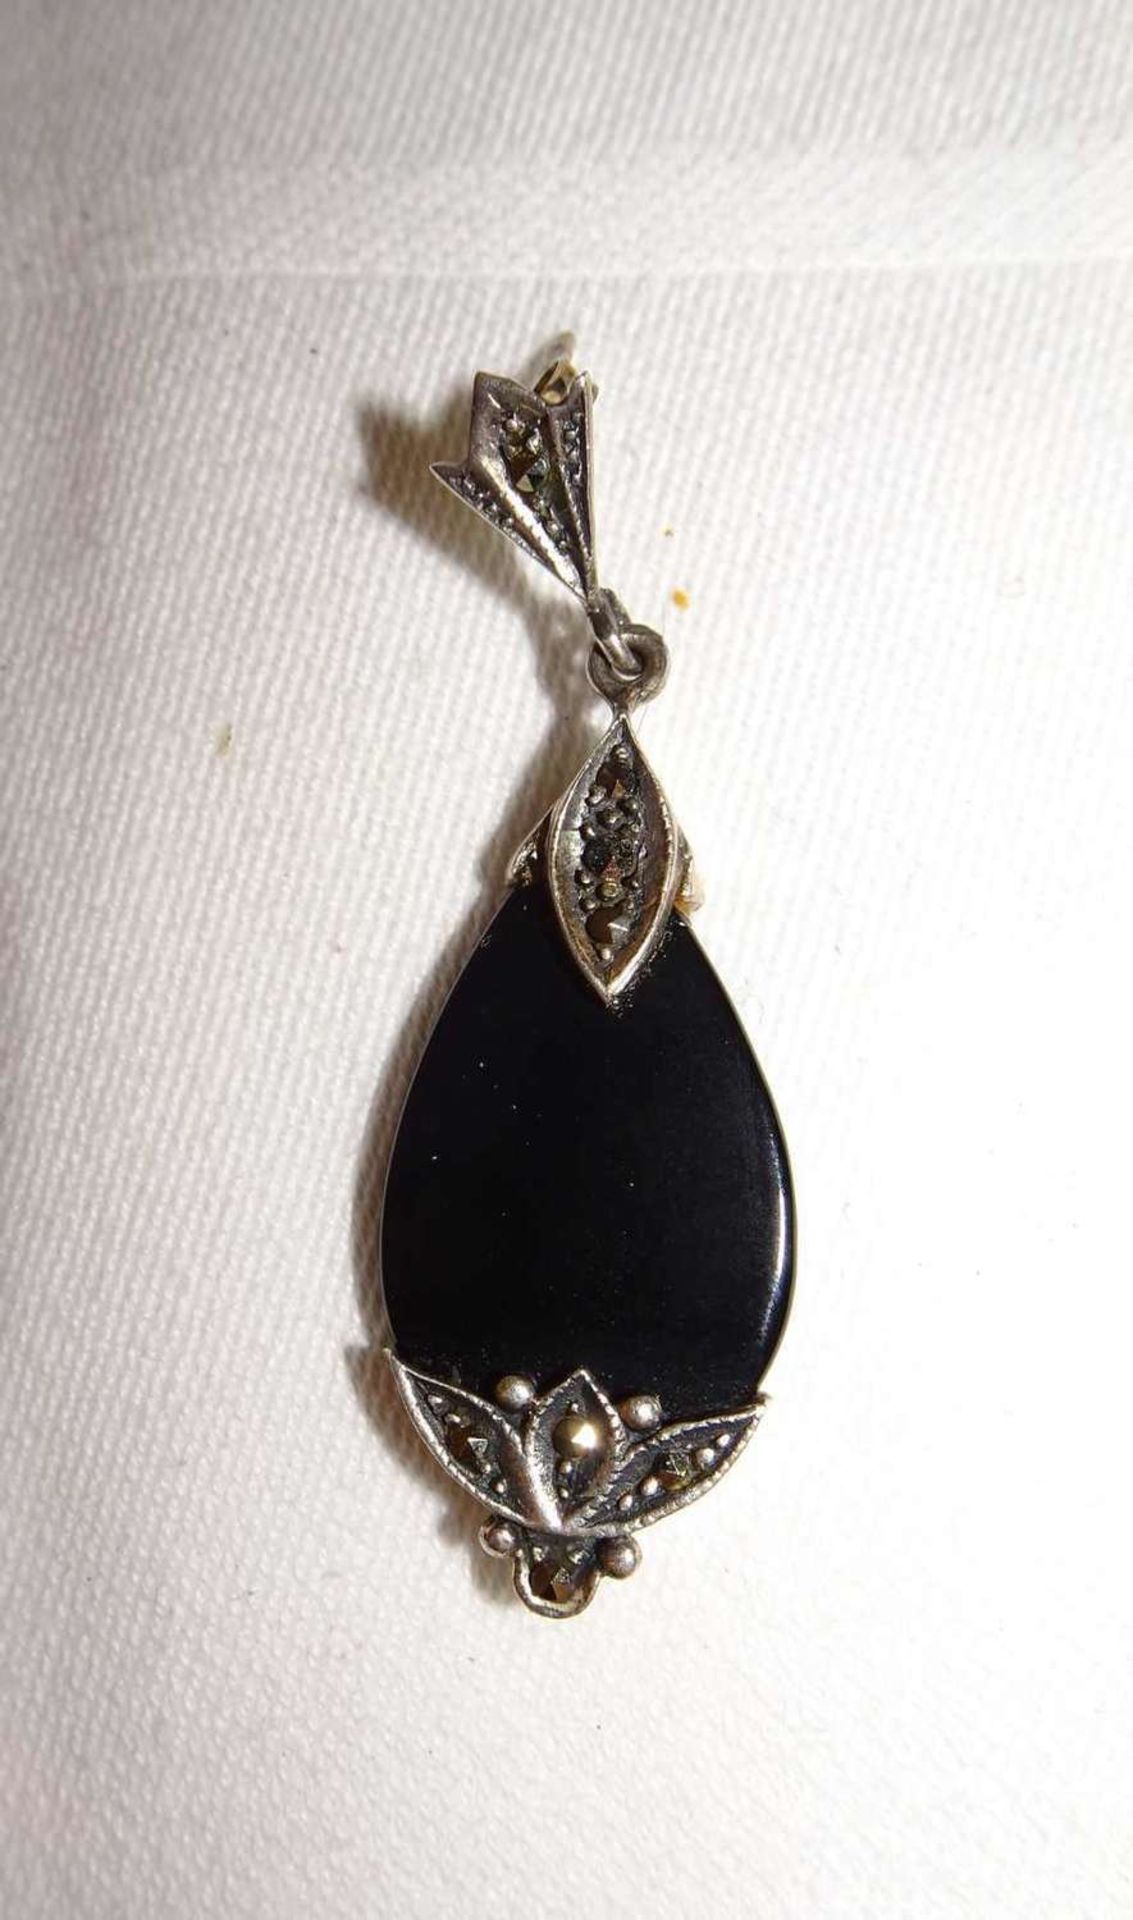 Ohrringe, Jugendstil, Silber, mit Onyx und Markasiten. Earrings, Art Nouveau, silver, with onyx and - Image 2 of 2